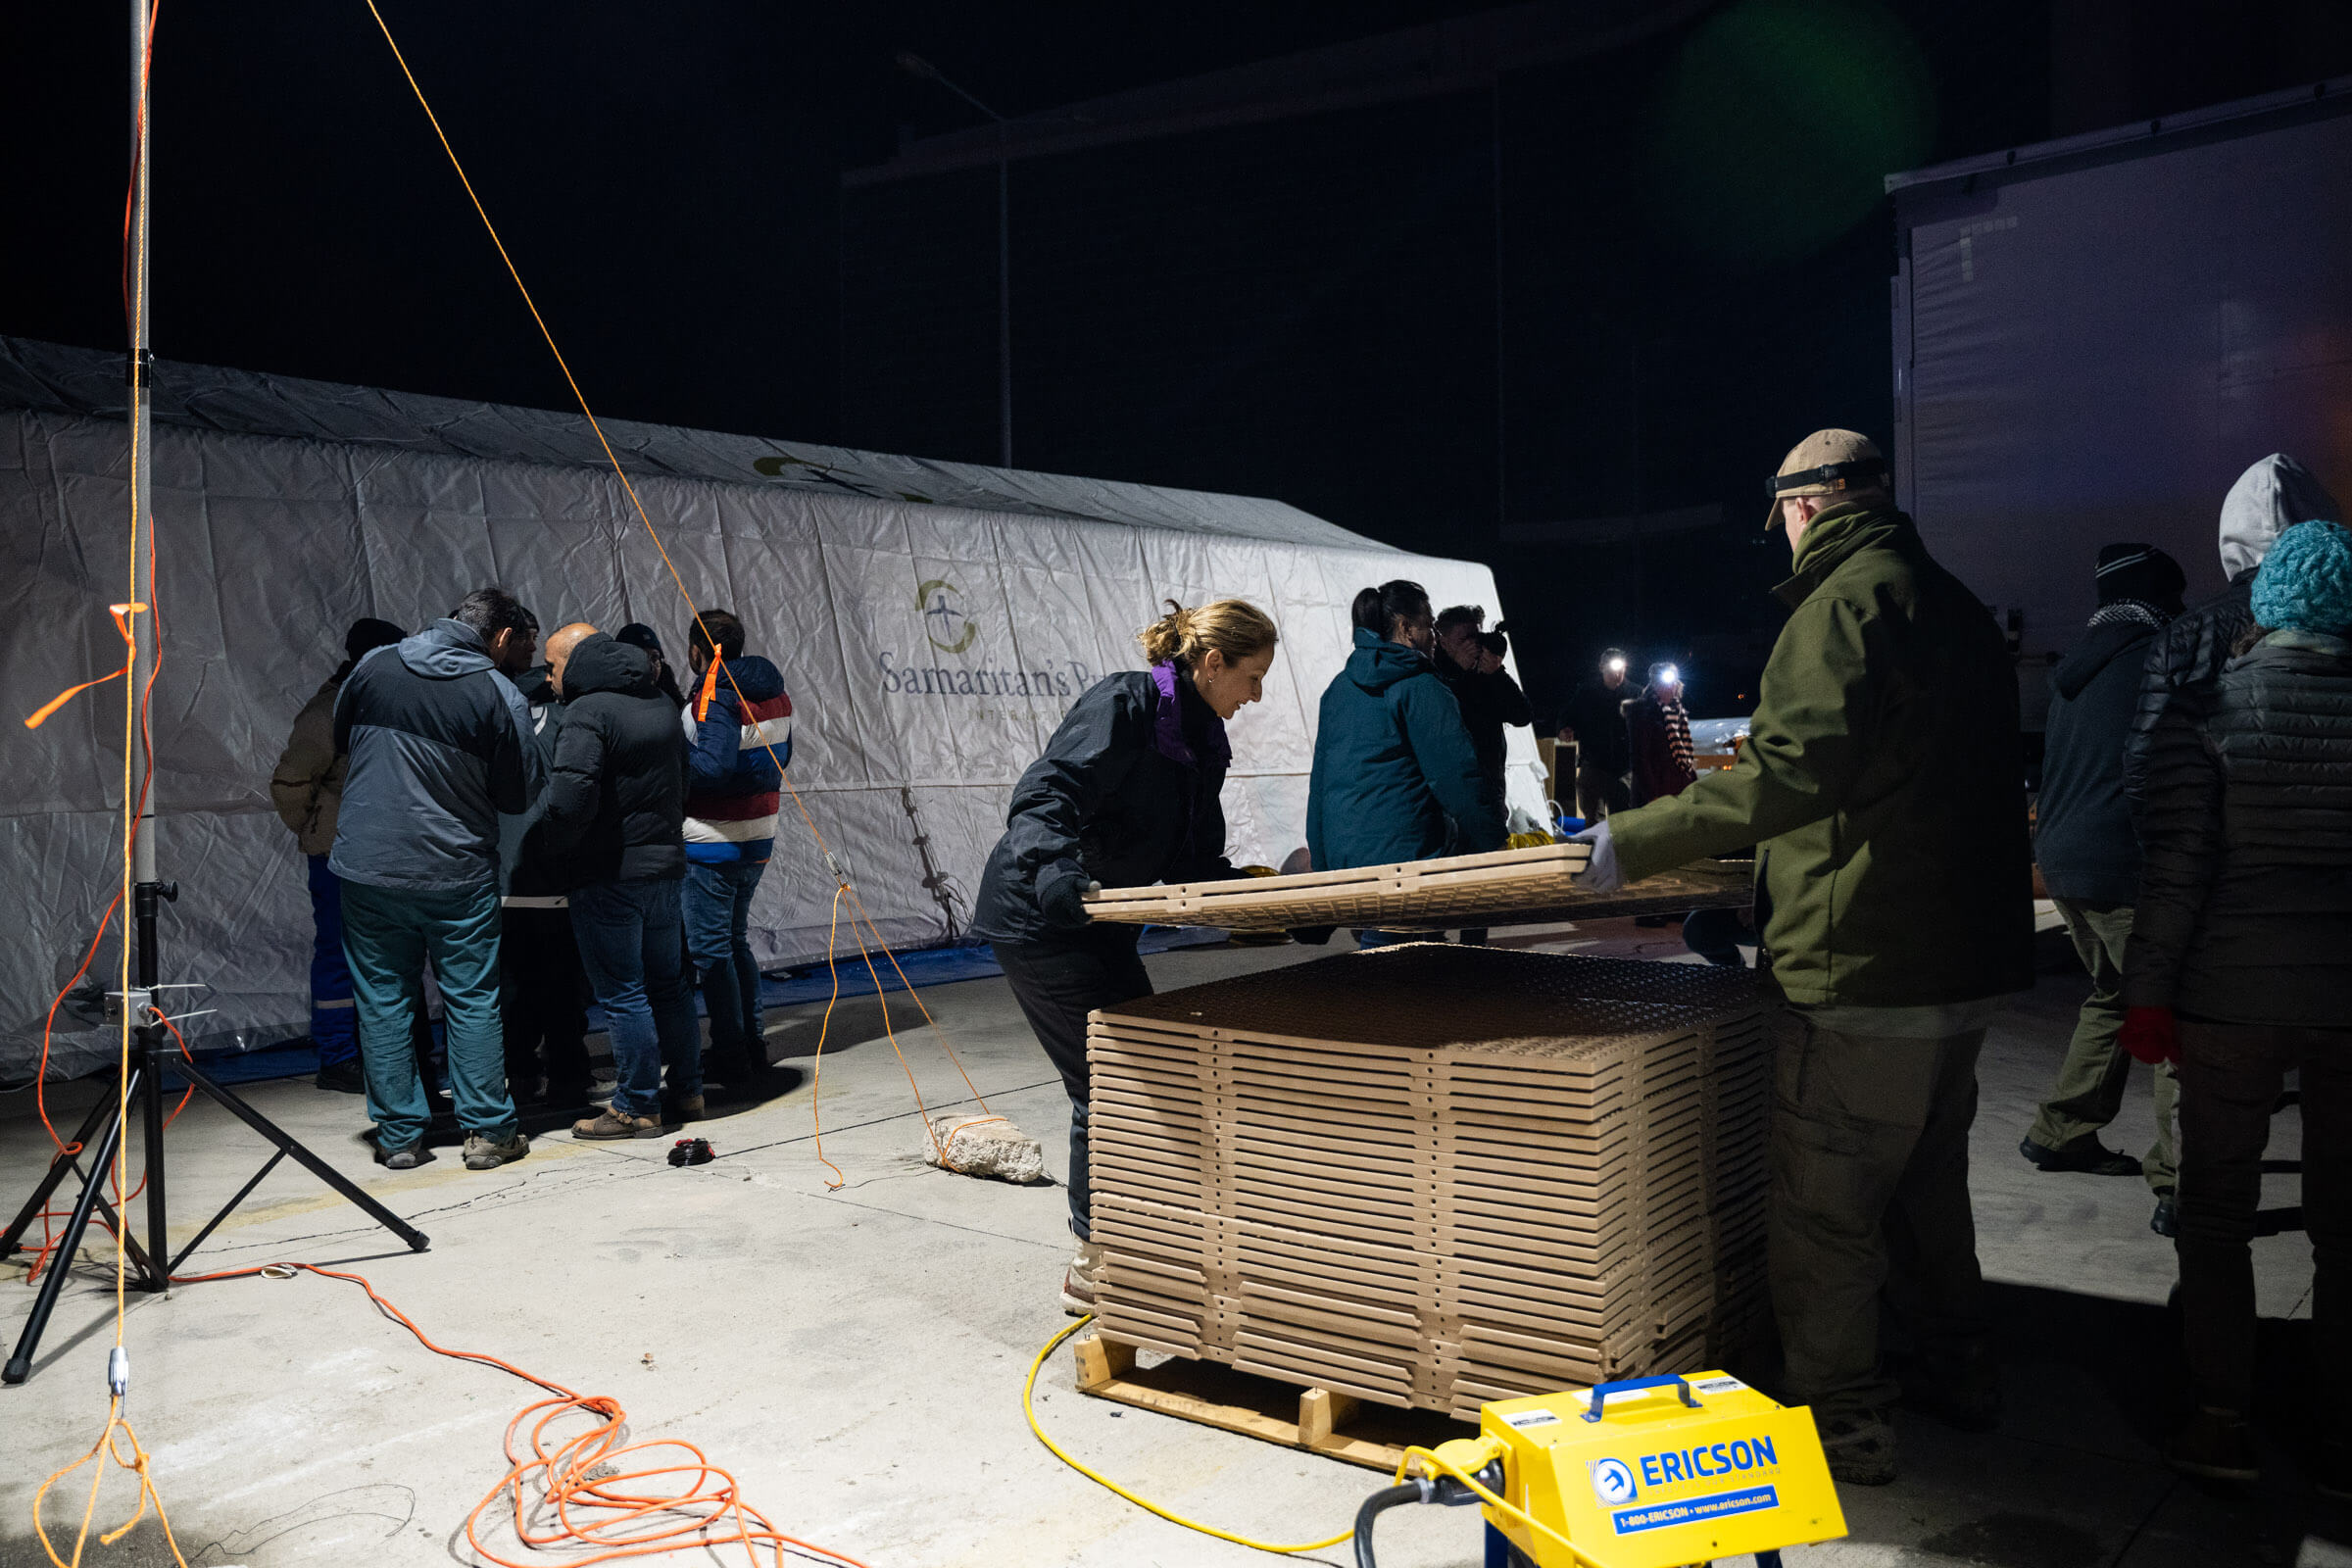 Our teams worked through the night constructing tents and assembling hospital equipment.